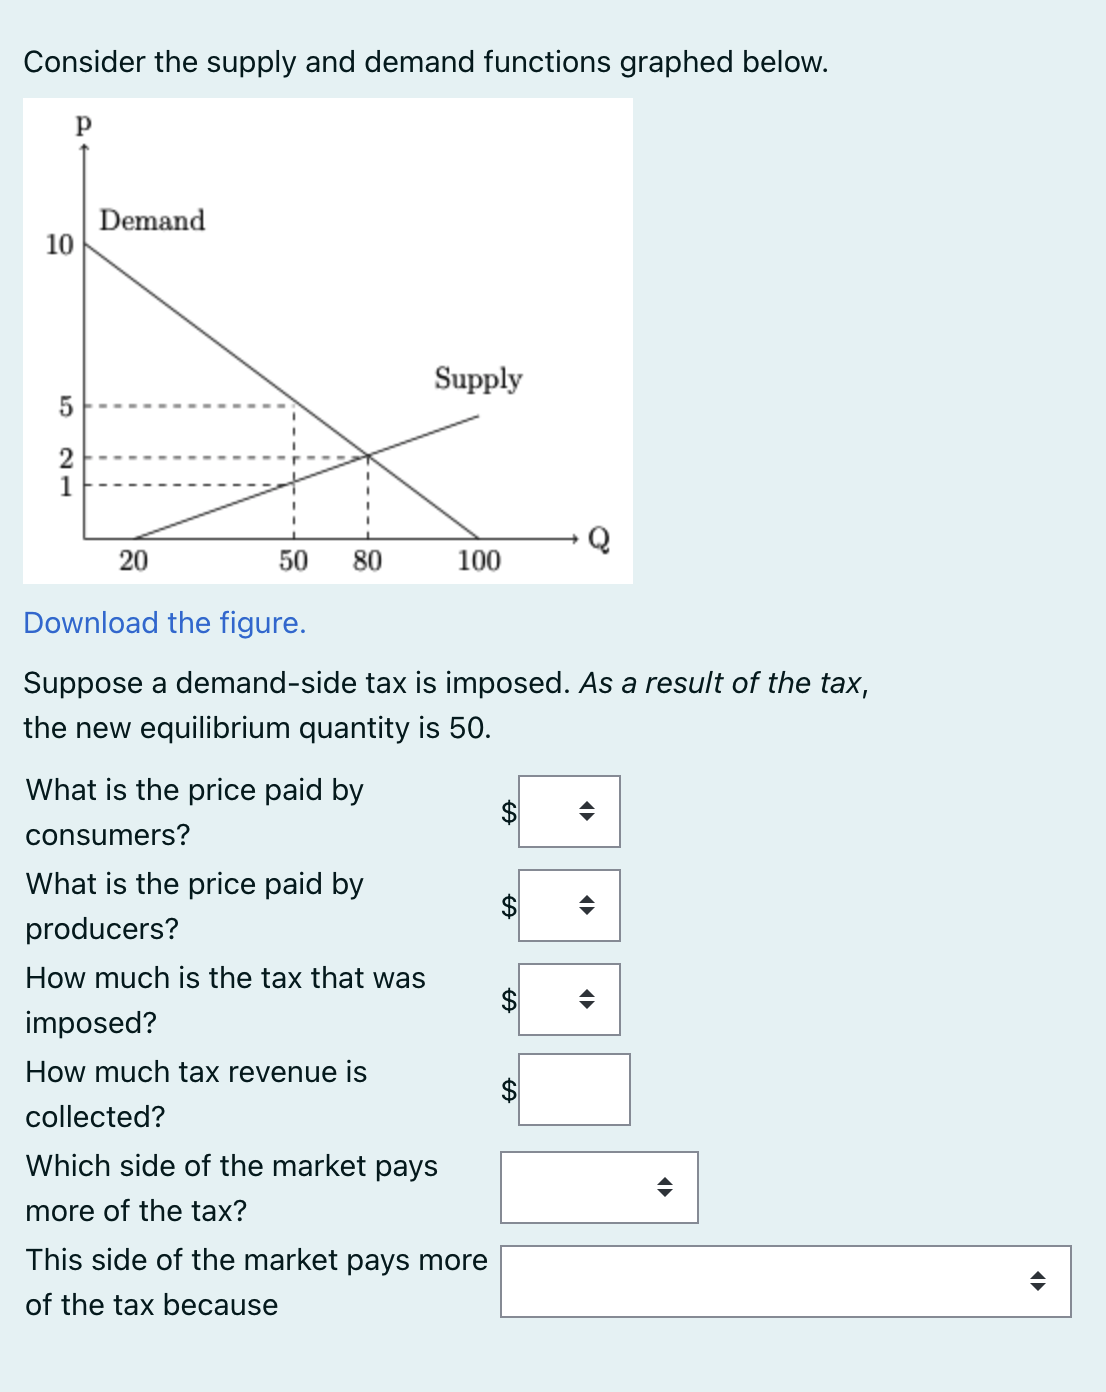 Consider the supply and demand functions graphed below.
Р
Demand
Supply
20
50
80
100
Download the figure.
Suppose a demand-side tax is imposed. As a result of the tax,
the new equilibrium quantity is 50.
What is the price paid by
consumers?
What is the price paid by
producers?
How much is the tax that was
imposed?
How much tax revenue is
collected?
Which side of the market pays
more of the tax?
This side of the market pays more
of the tax because
10
LO
21
GA
GA